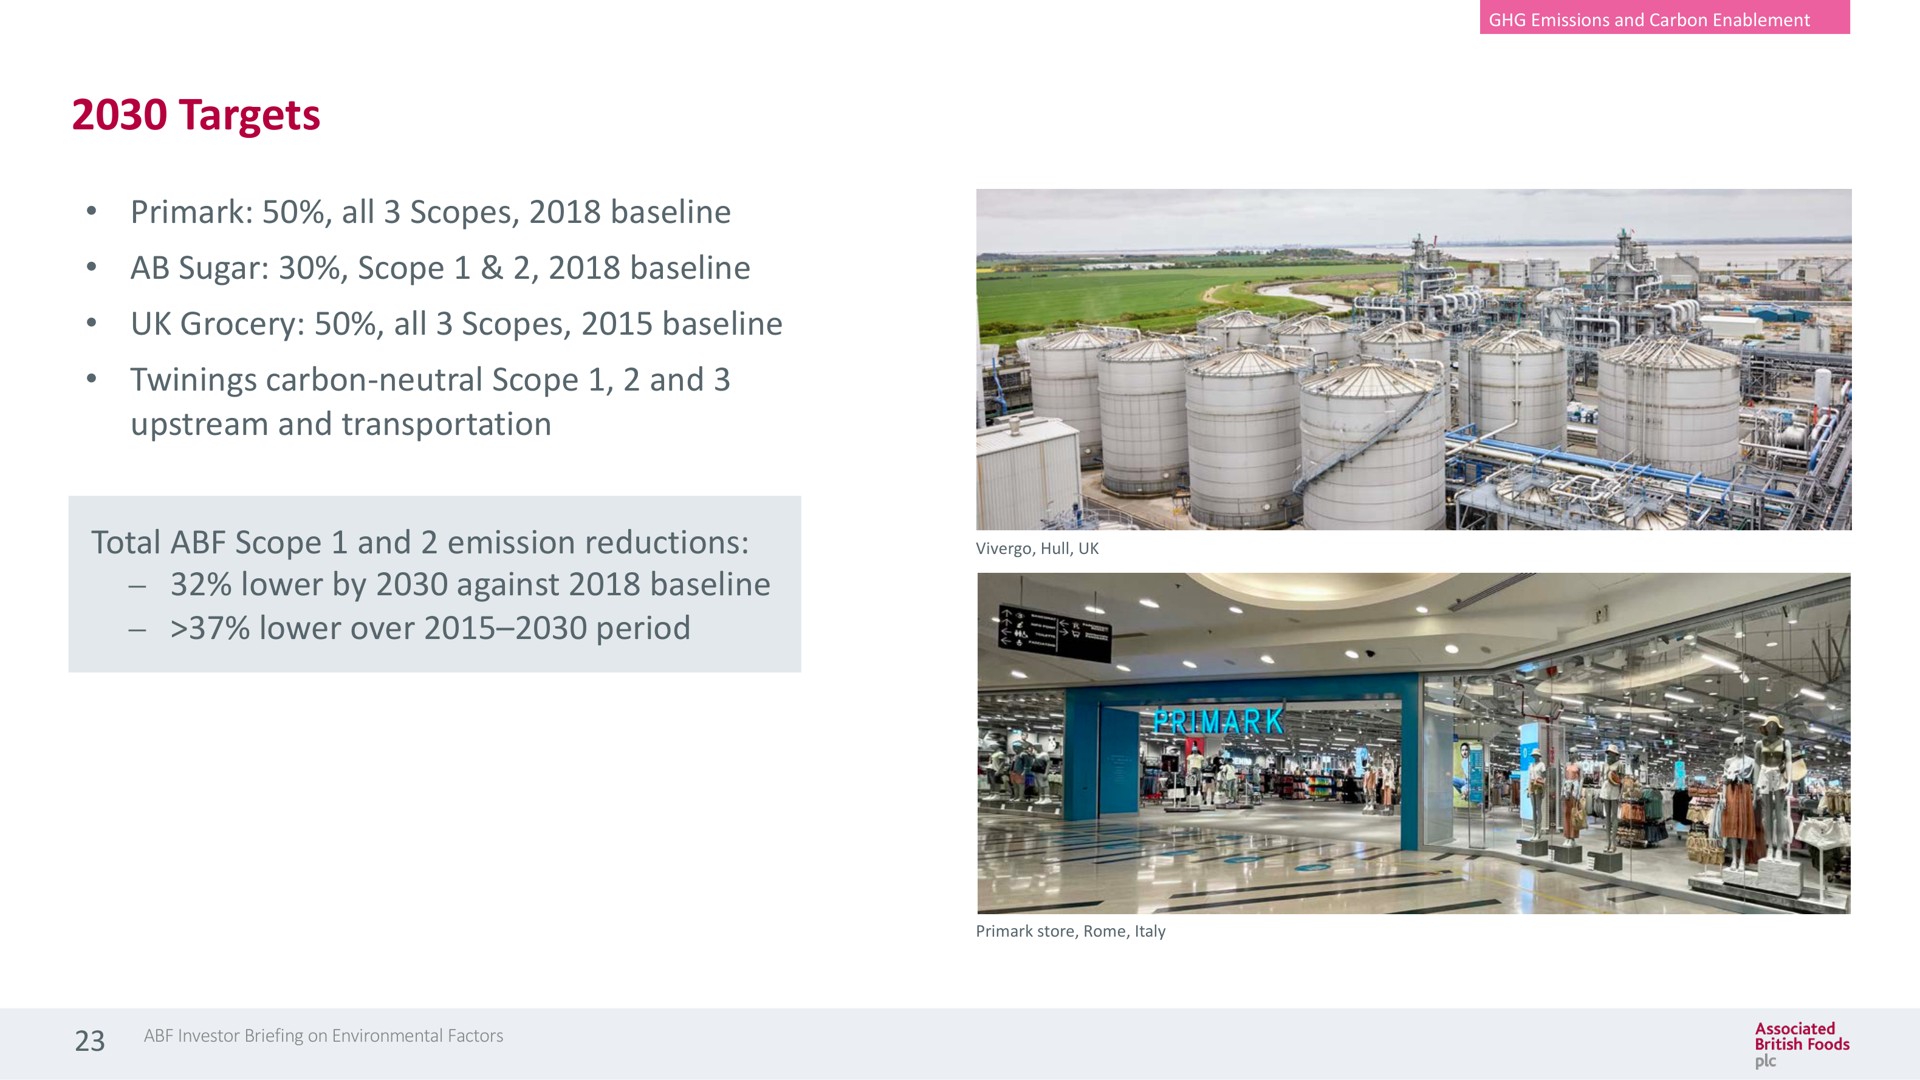 targets all scopes sugar scope grocery all scopes twinings carbon neutral scope and upstream and transportation total scope and emission reductions lower by against lower over period | Associated British Foods